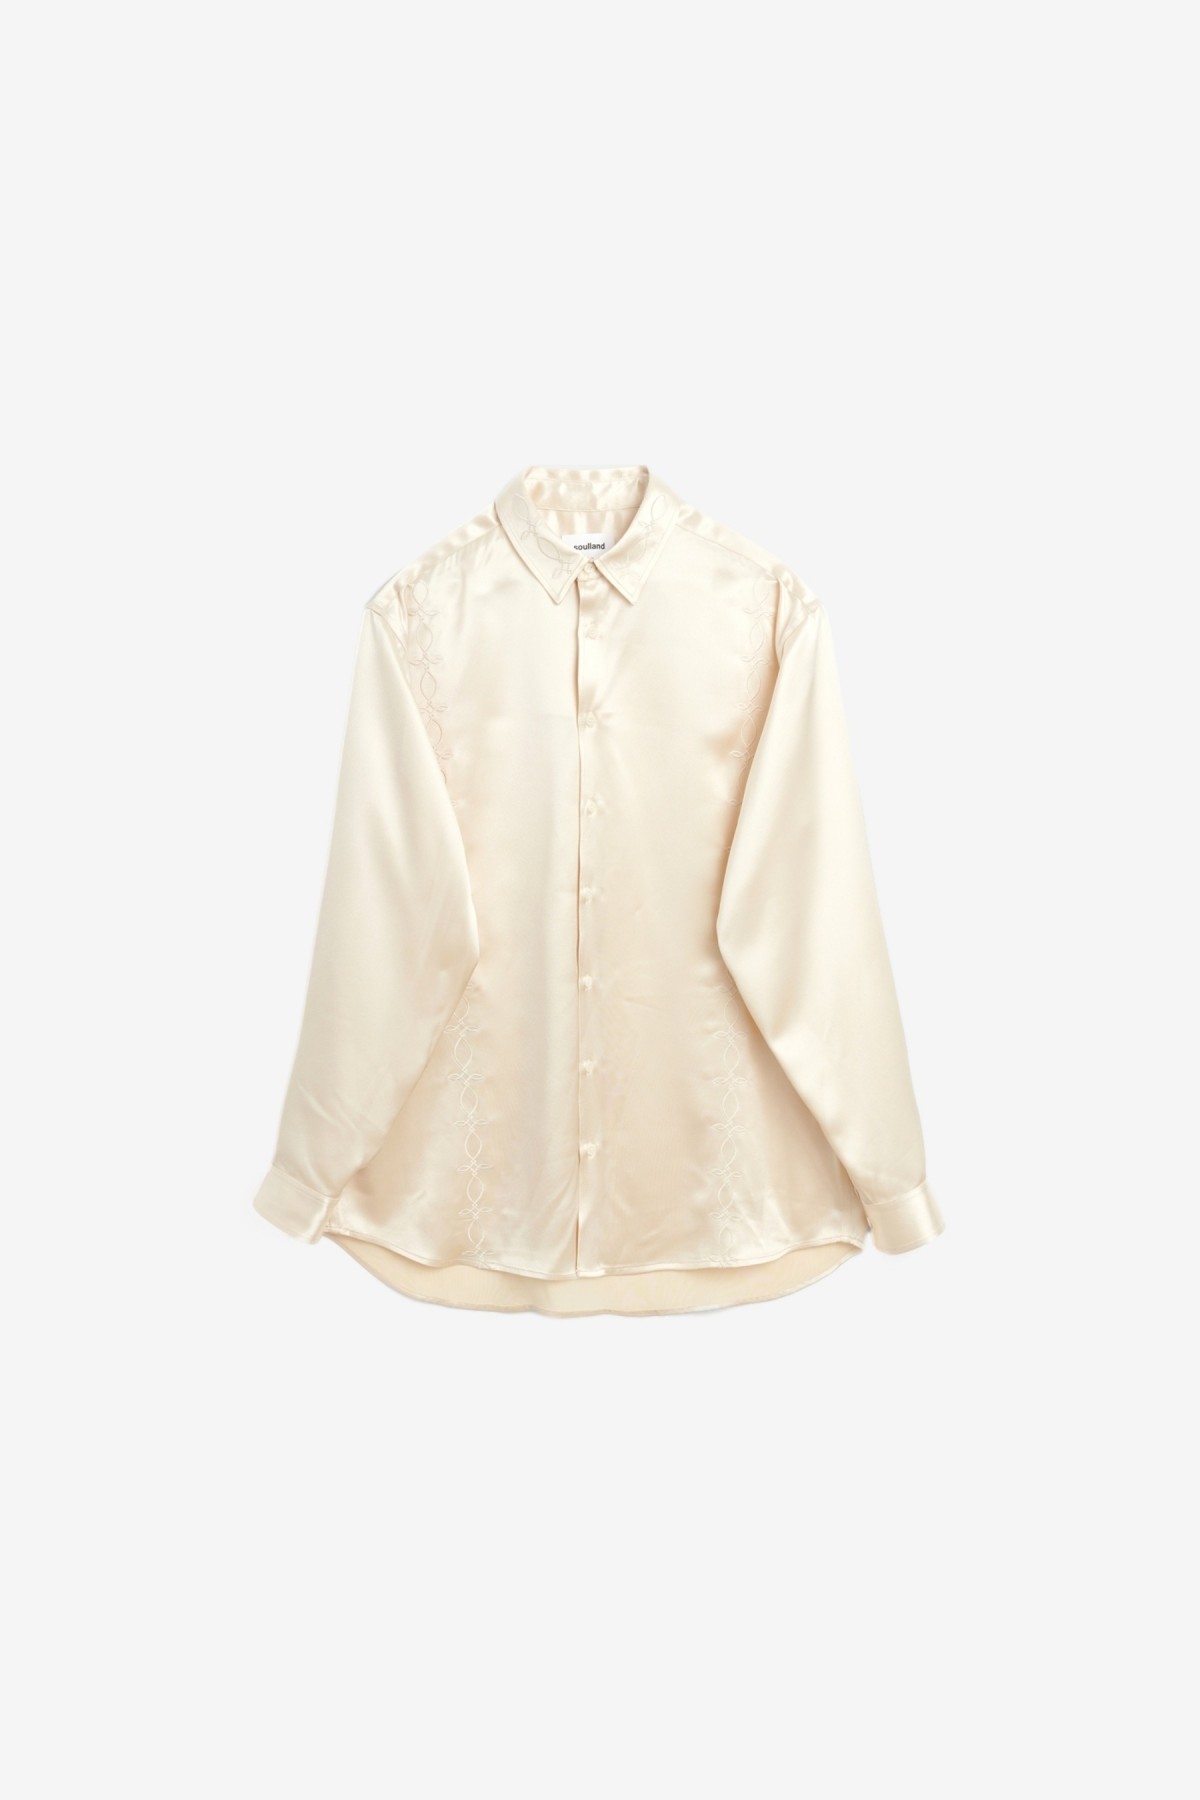 Soulland Damon Embroided Shirt in Off White